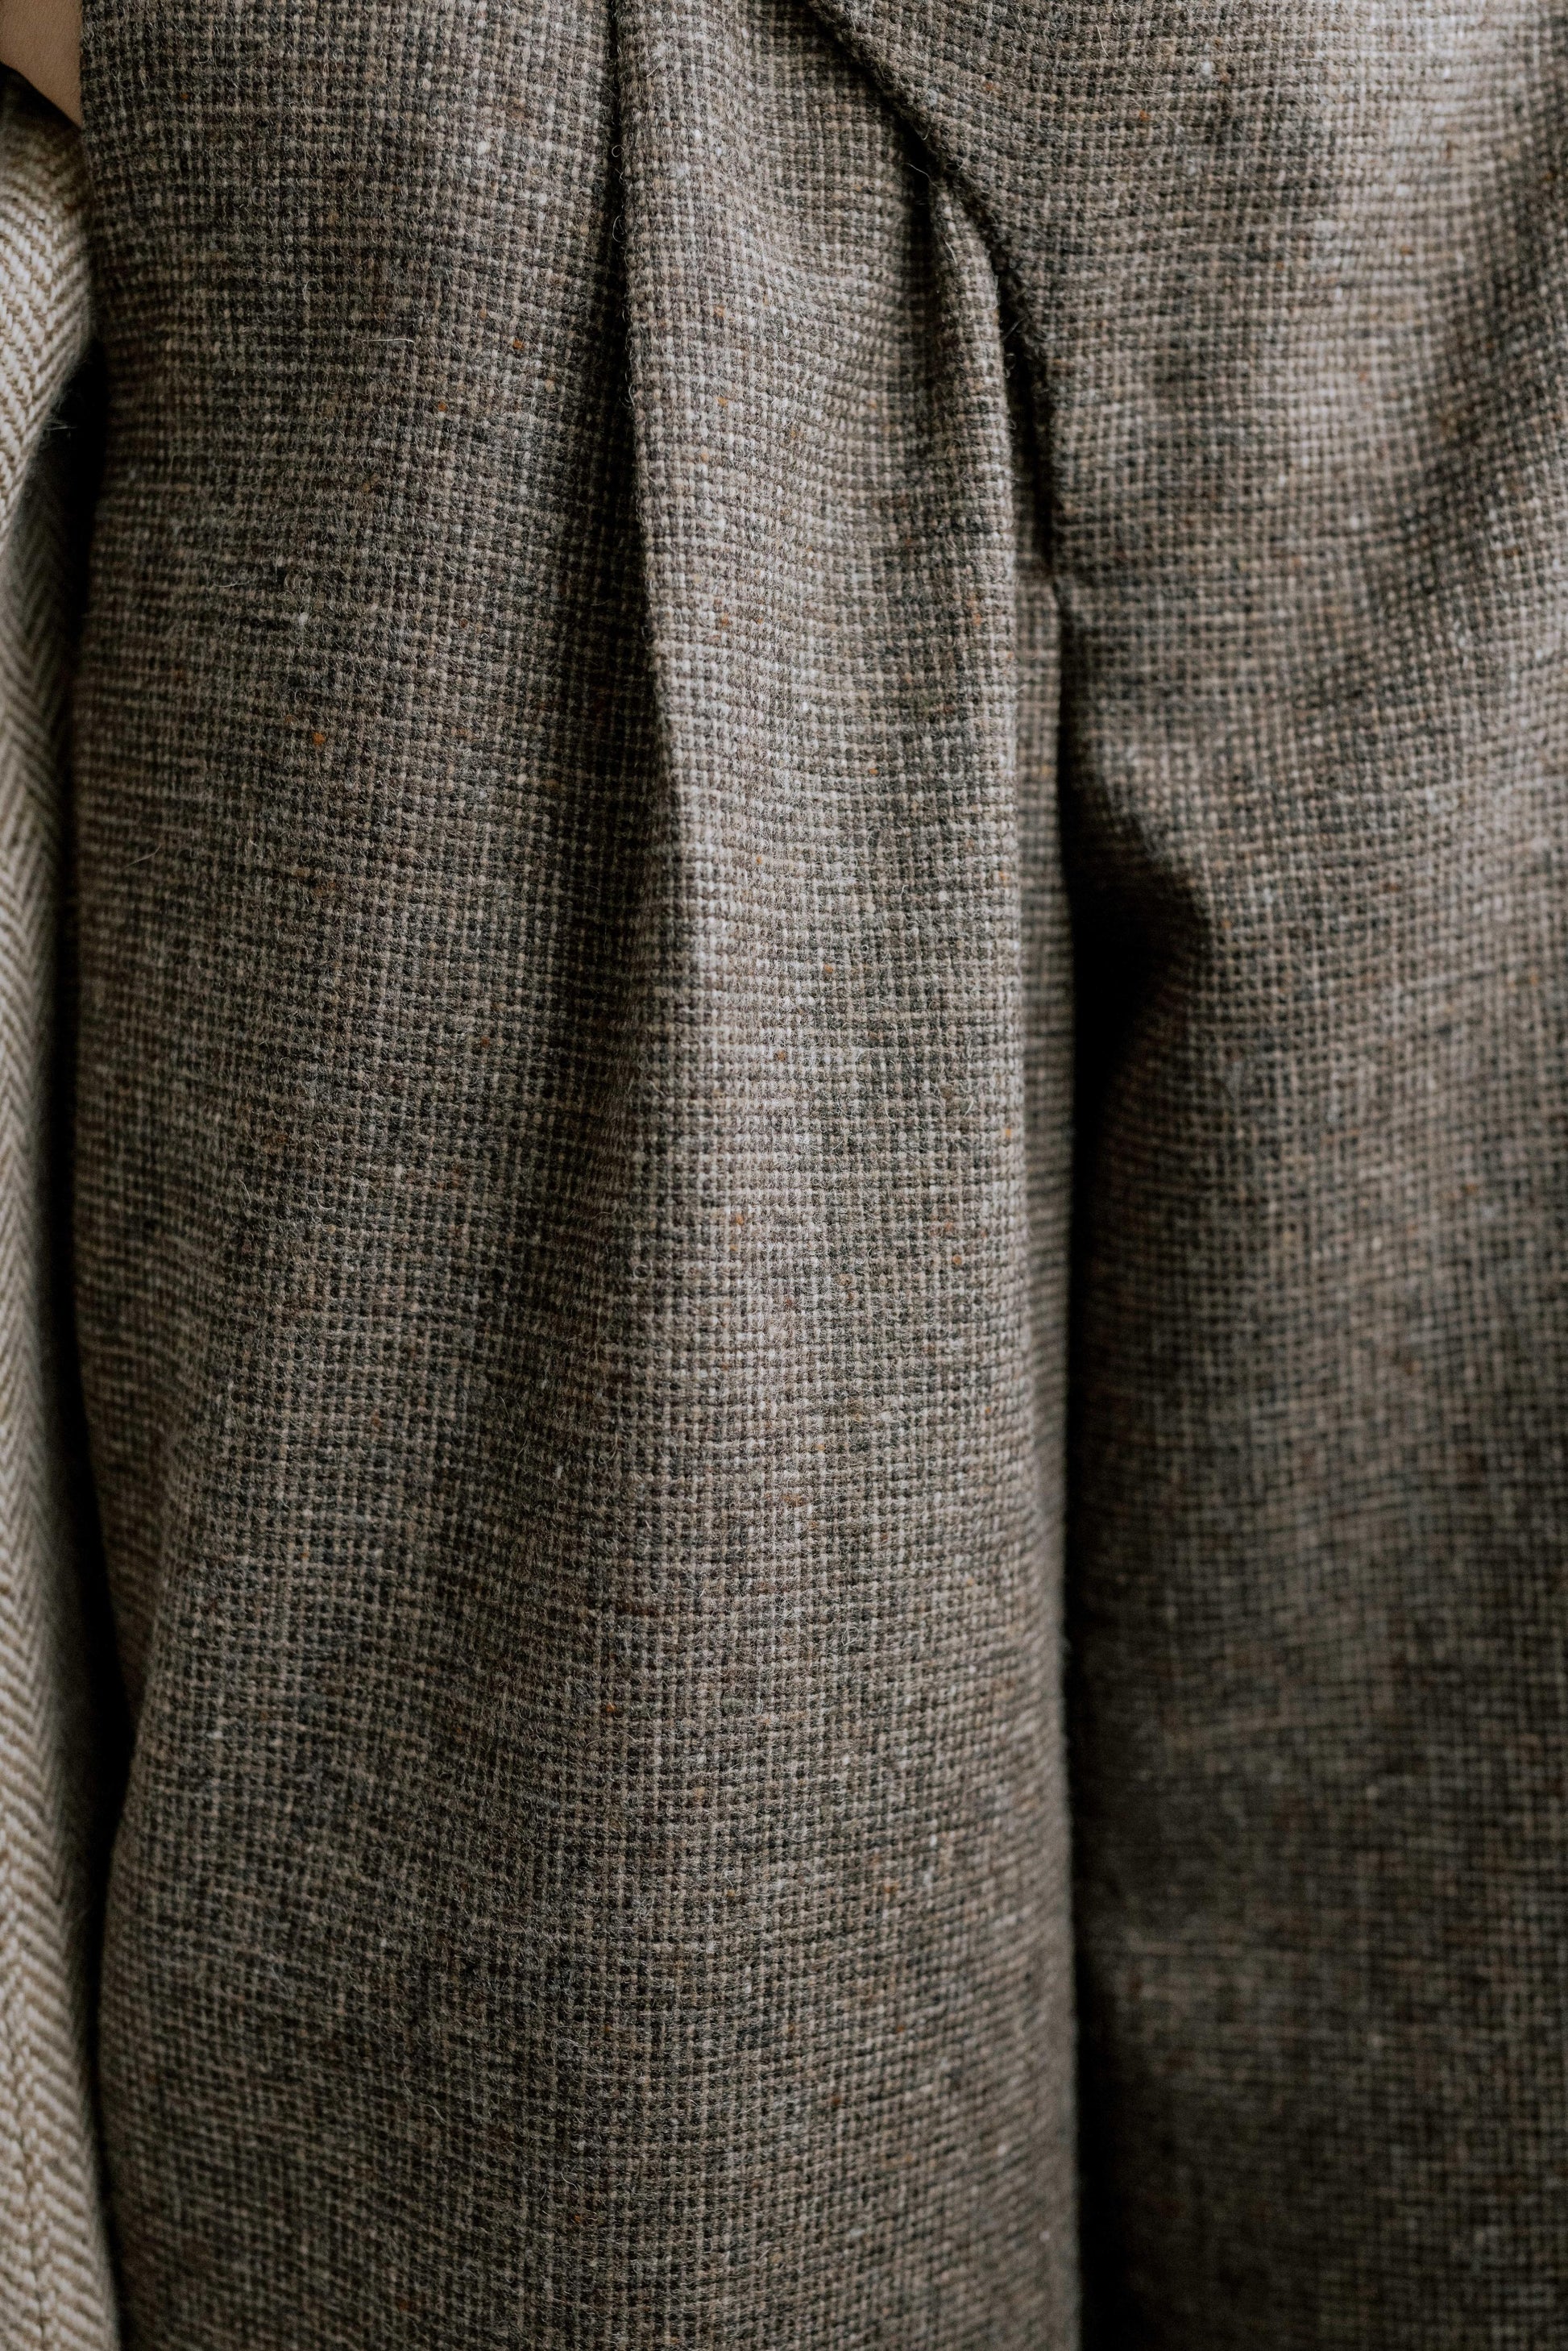 TWEED TROUSERS | We are so delighted to introduce a big new step for us as a brand by introducing Donegal Tweed to our core collection. An expansion of our deep love and passion for Irish textiles and keeping our rich heritage alive- originating in Co Don